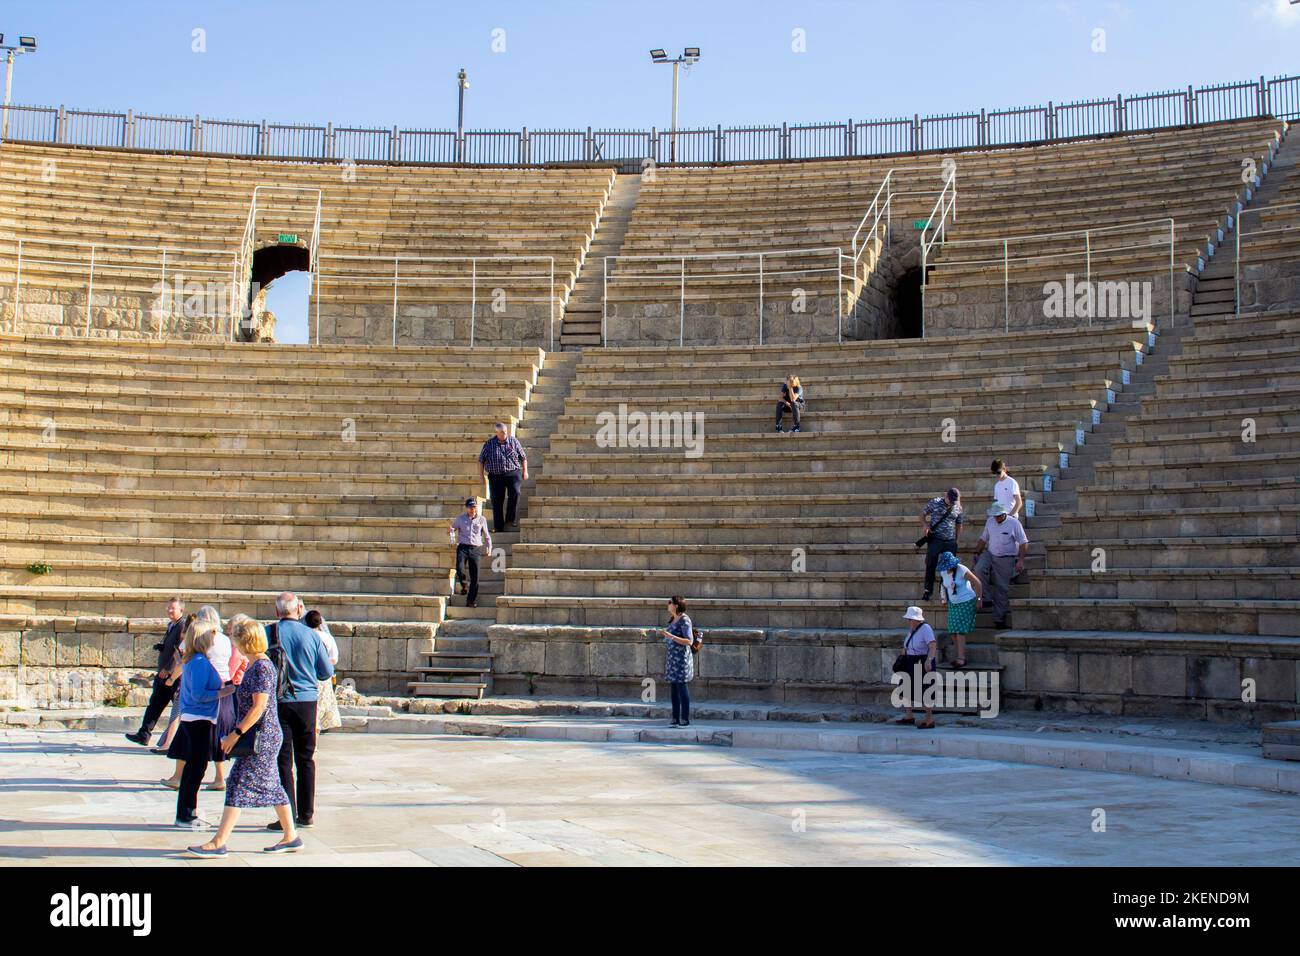 November 2022, Tourists in the ancient Roman amphitheater that forms part of Caeserea Maritima on the Mediterranean Coast of Israel. This magnificent Stock Photo